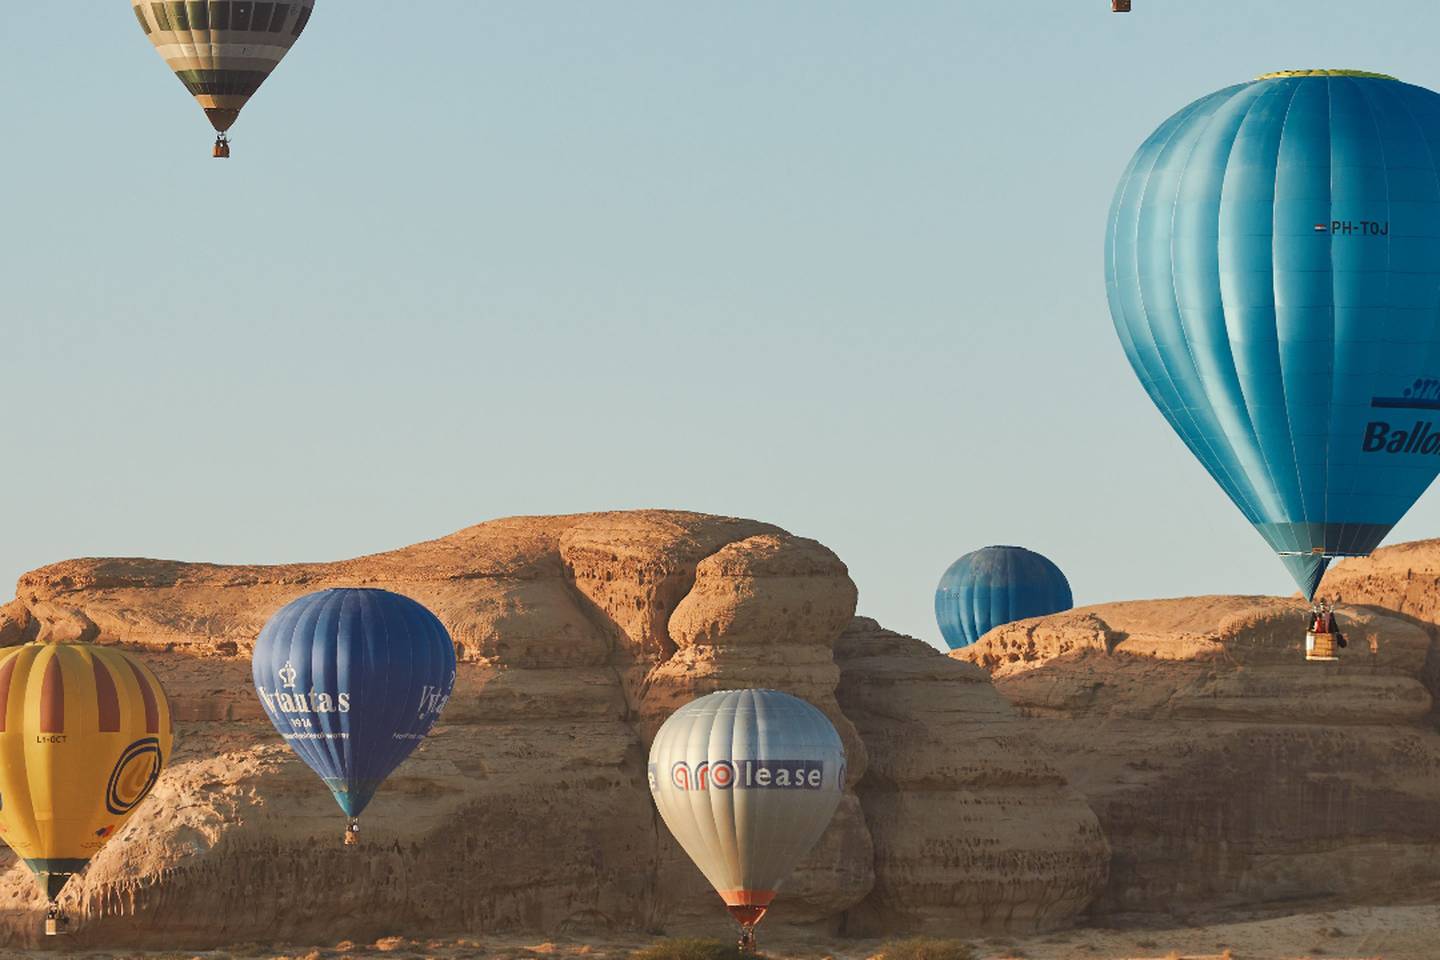 World record for largest hot air balloon glow show set in Saudi Arabia